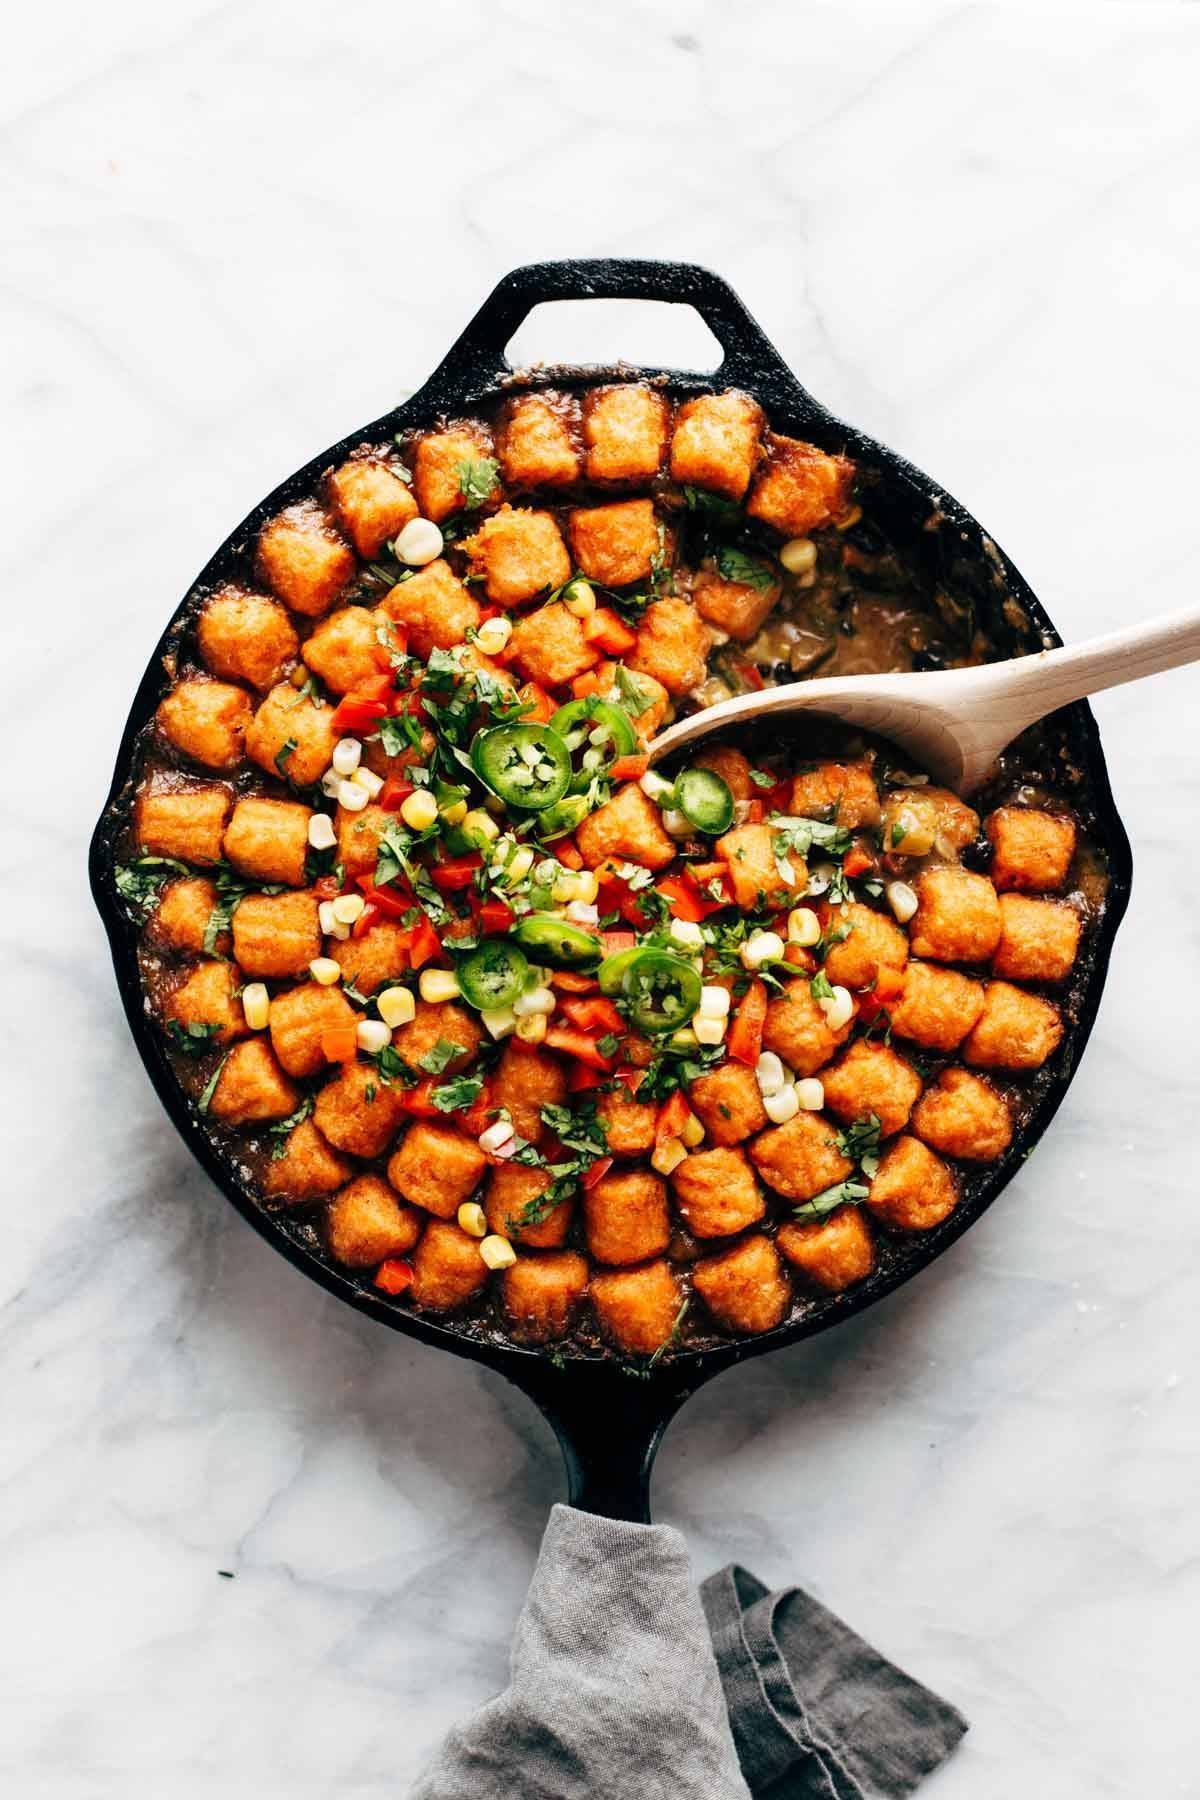 Tater tot hot dish in a Pan made of cast iron.